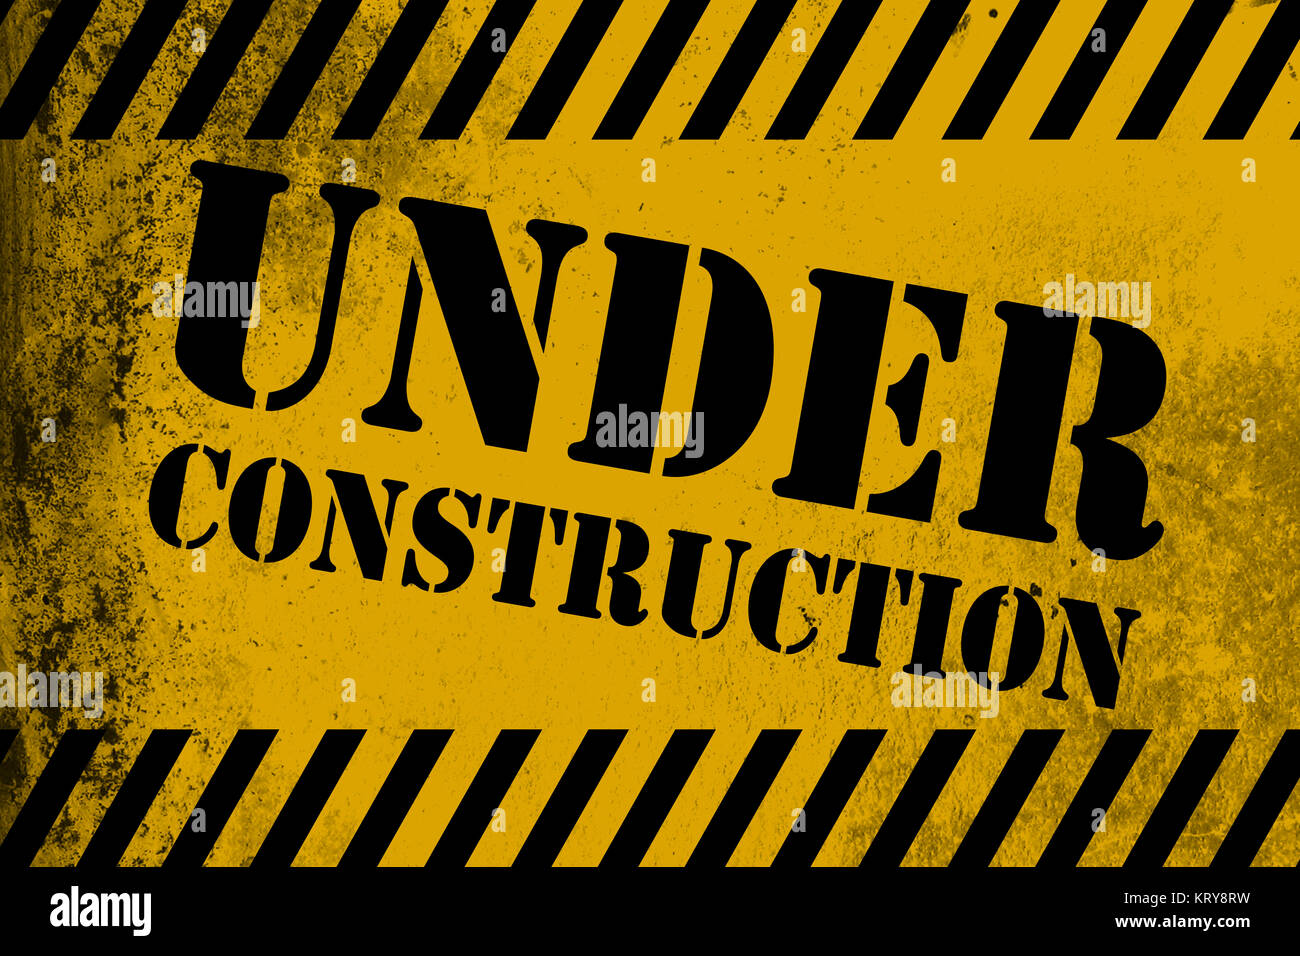 Under construction sign yellow with stripes Stock Photo - Alamy